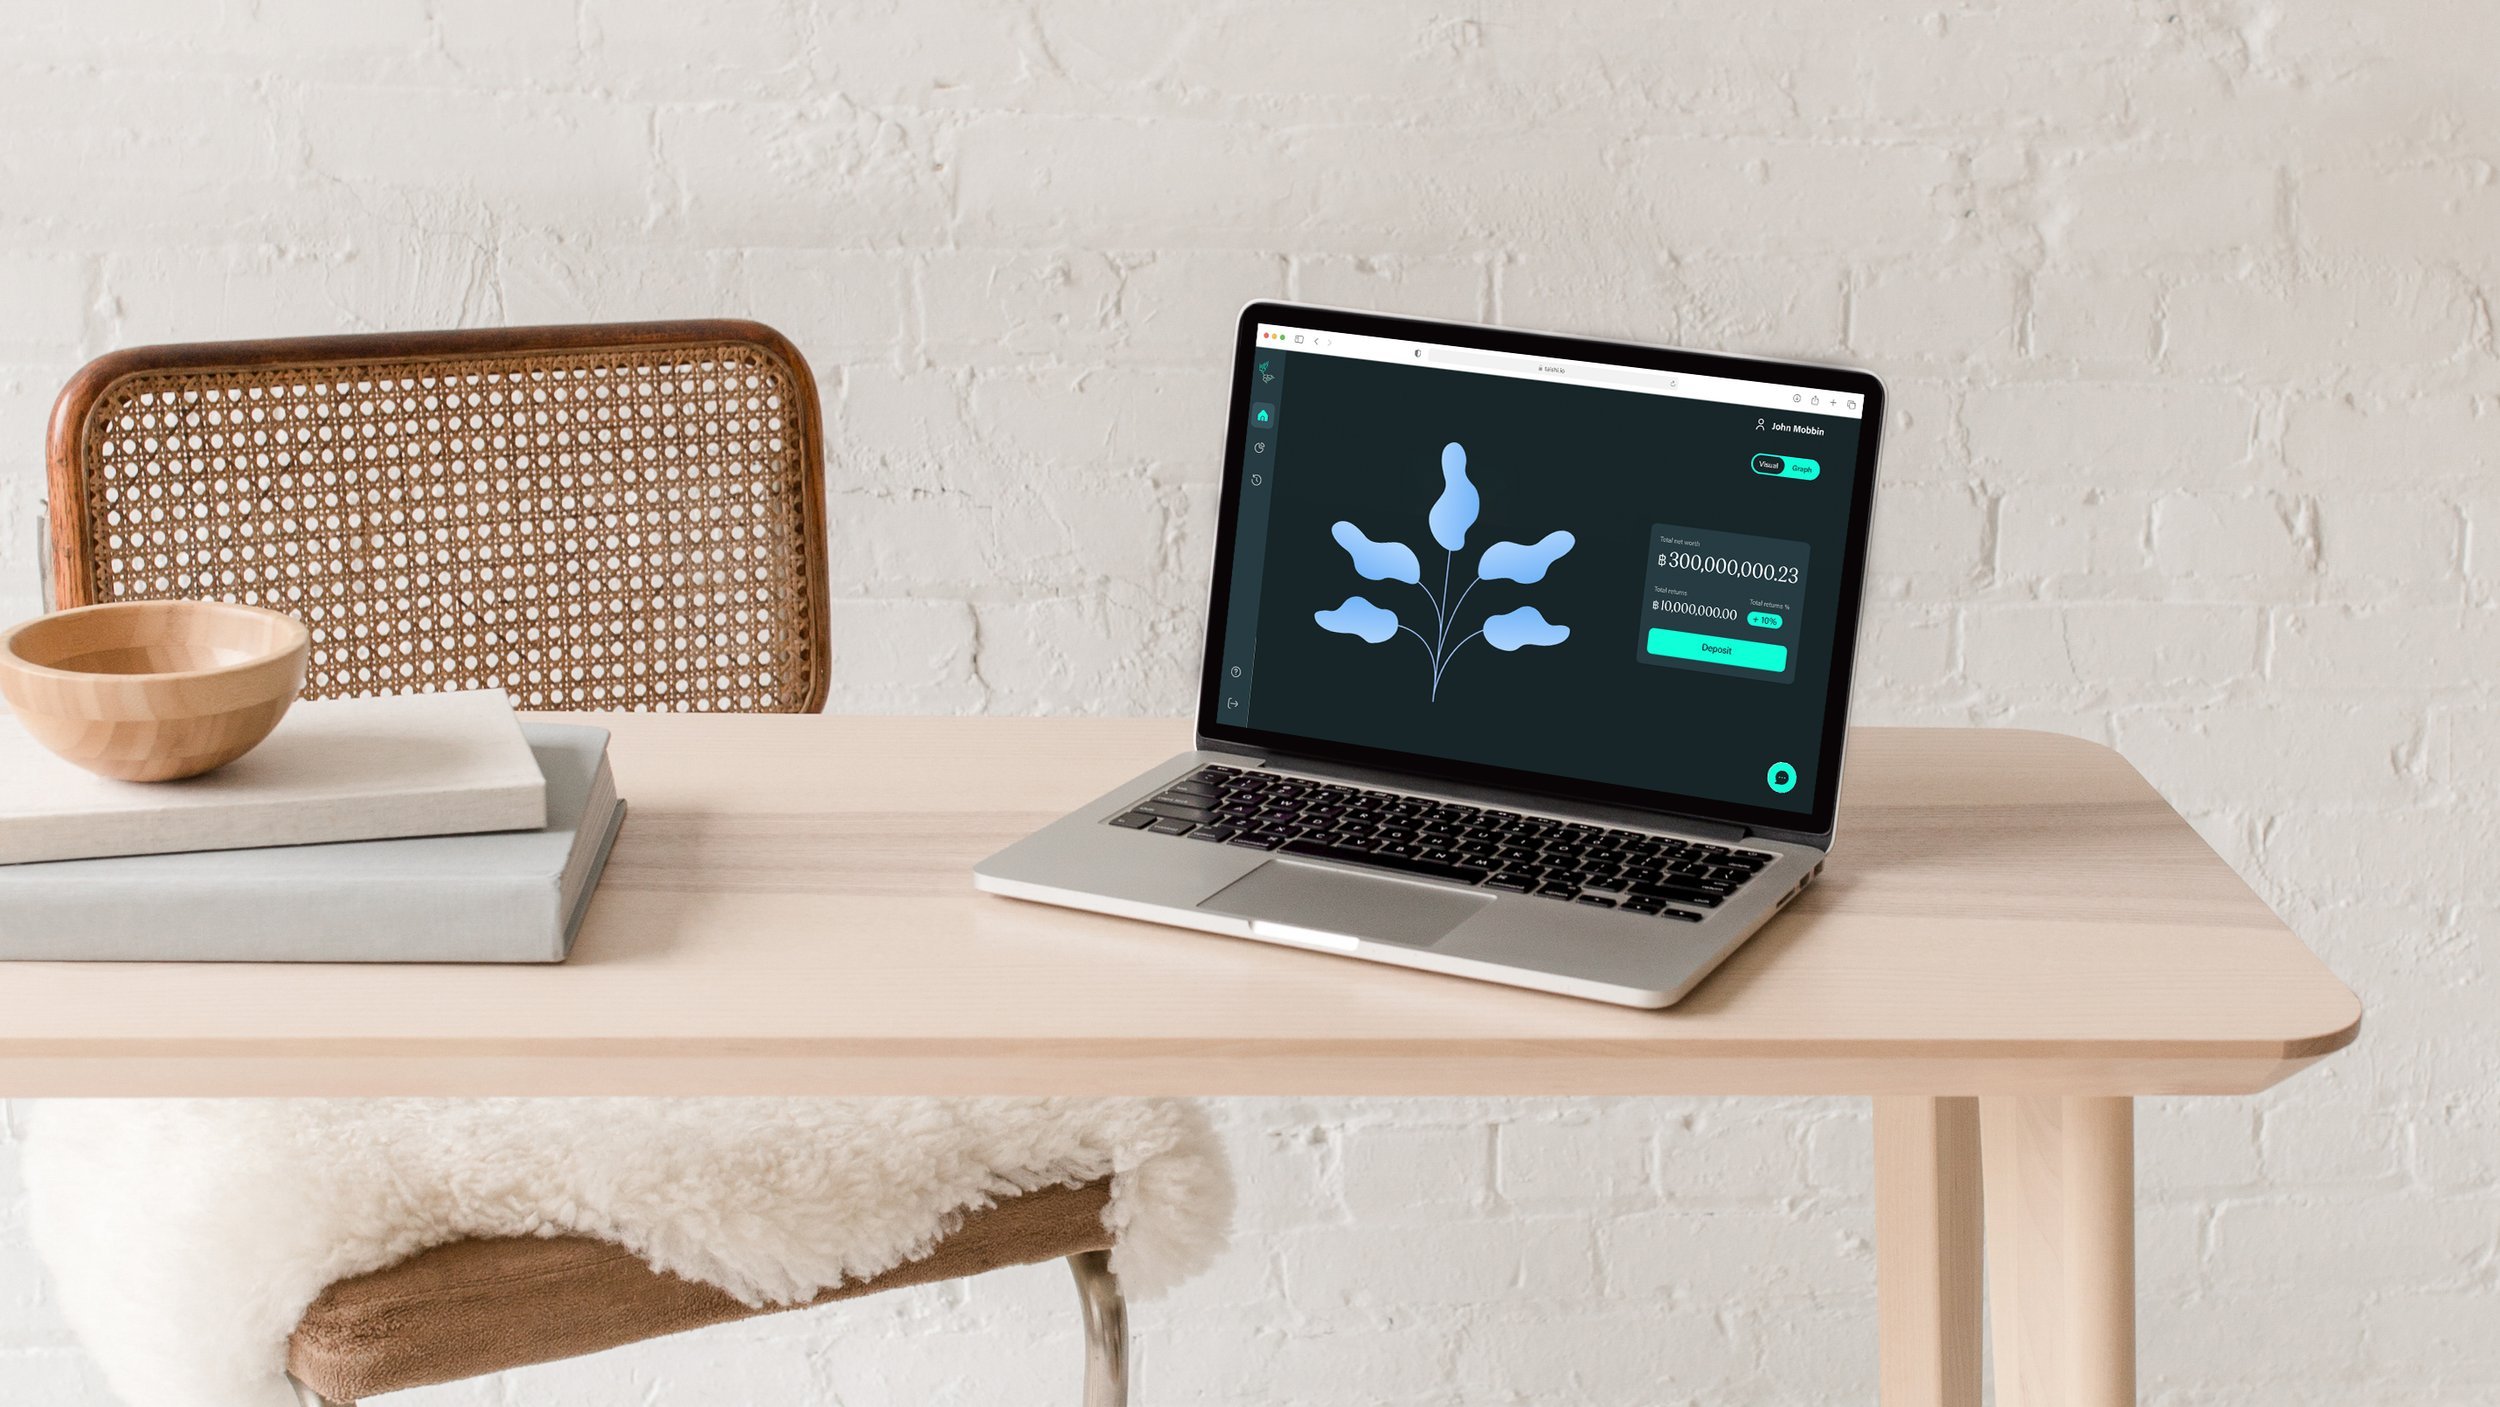 Taishi.io mock up product on macbook screen laying on a wooden table aesthetic mood